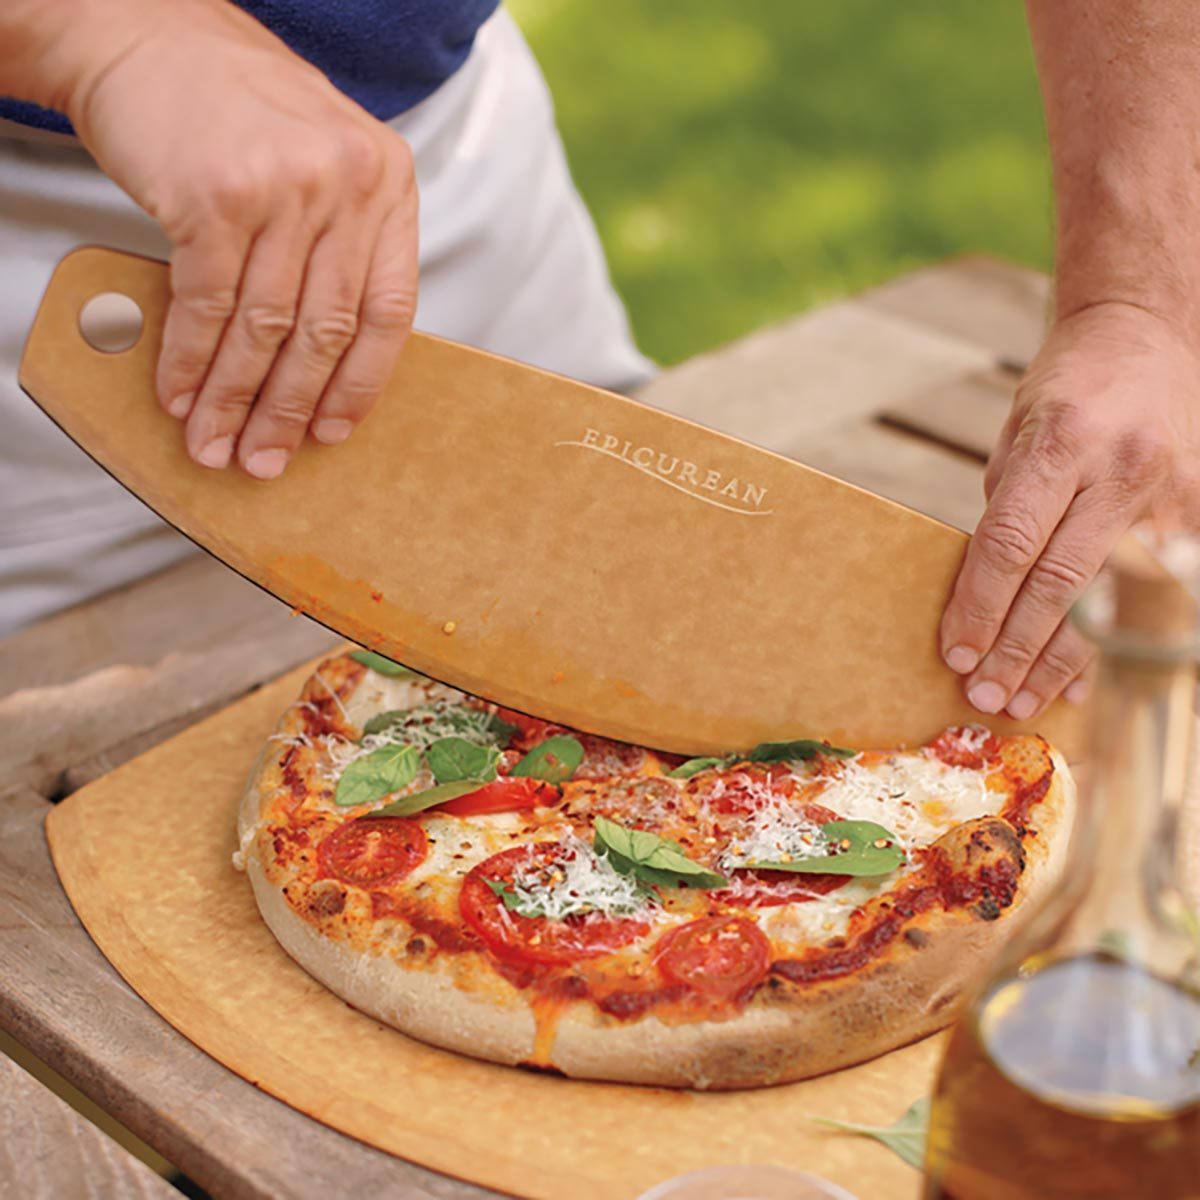 Expanding Smart Pizza Storage Container